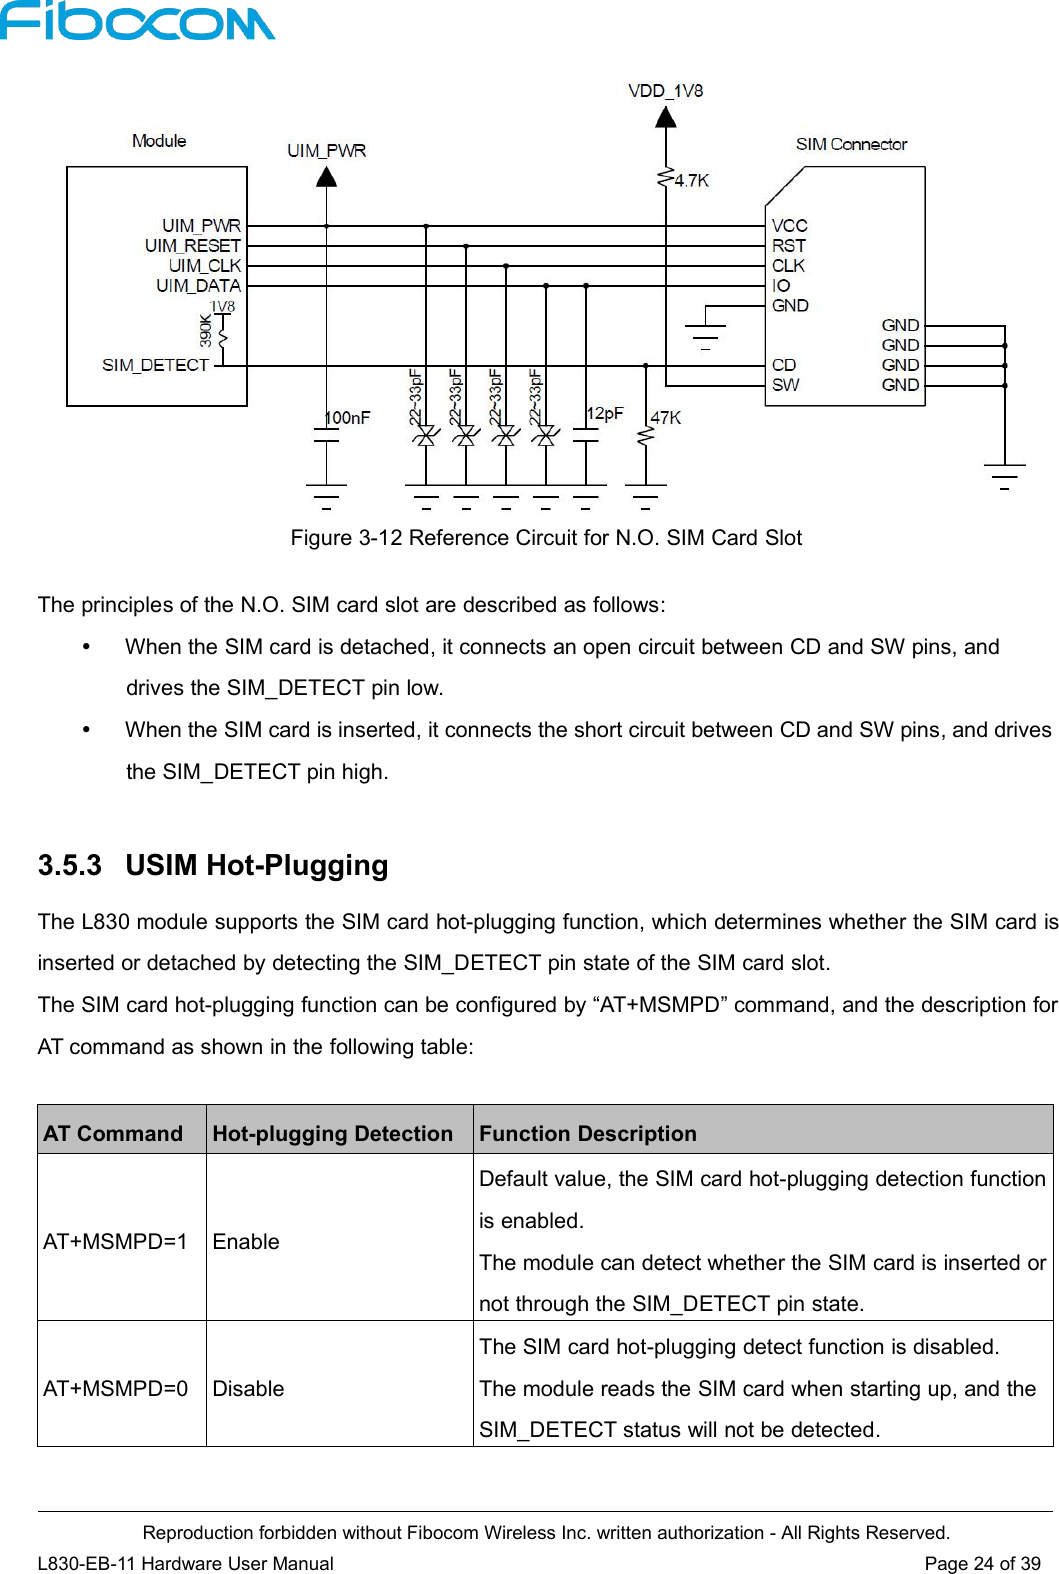 Reproduction forbidden without Fibocom Wireless Inc. written authorization - All Rights Reserved.L830-EB-11 Hardware User Manual Page 24 of 39Figure 3-12 Reference Circuit for N.O. SIM Card SlotThe principles of the N.O. SIM card slot are described as follows:When the SIM card is detached, it connects an open circuit between CD and SW pins, anddrives the SIM_DETECT pin low.When the SIM card is inserted, it connects the short circuit between CD and SW pins, and drivesthe SIM_DETECT pin high.3.5.3 USIM Hot-PluggingThe L830 module supports the SIM card hot-plugging function, which determines whether the SIM card isinserted or detached by detecting the SIM_DETECT pin state of the SIM card slot.The SIM card hot-plugging function can be configured by “AT+MSMPD” command, and the description forAT command as shown in the following table:AT CommandHot-plugging DetectionFunction DescriptionAT+MSMPD=1EnableDefault value, the SIM card hot-plugging detection functionis enabled.The module can detect whether the SIM card is inserted ornot through the SIM_DETECT pin state.AT+MSMPD=0DisableThe SIM card hot-plugging detect function is disabled.The module reads the SIM card when starting up, and theSIM_DETECT status will not be detected.